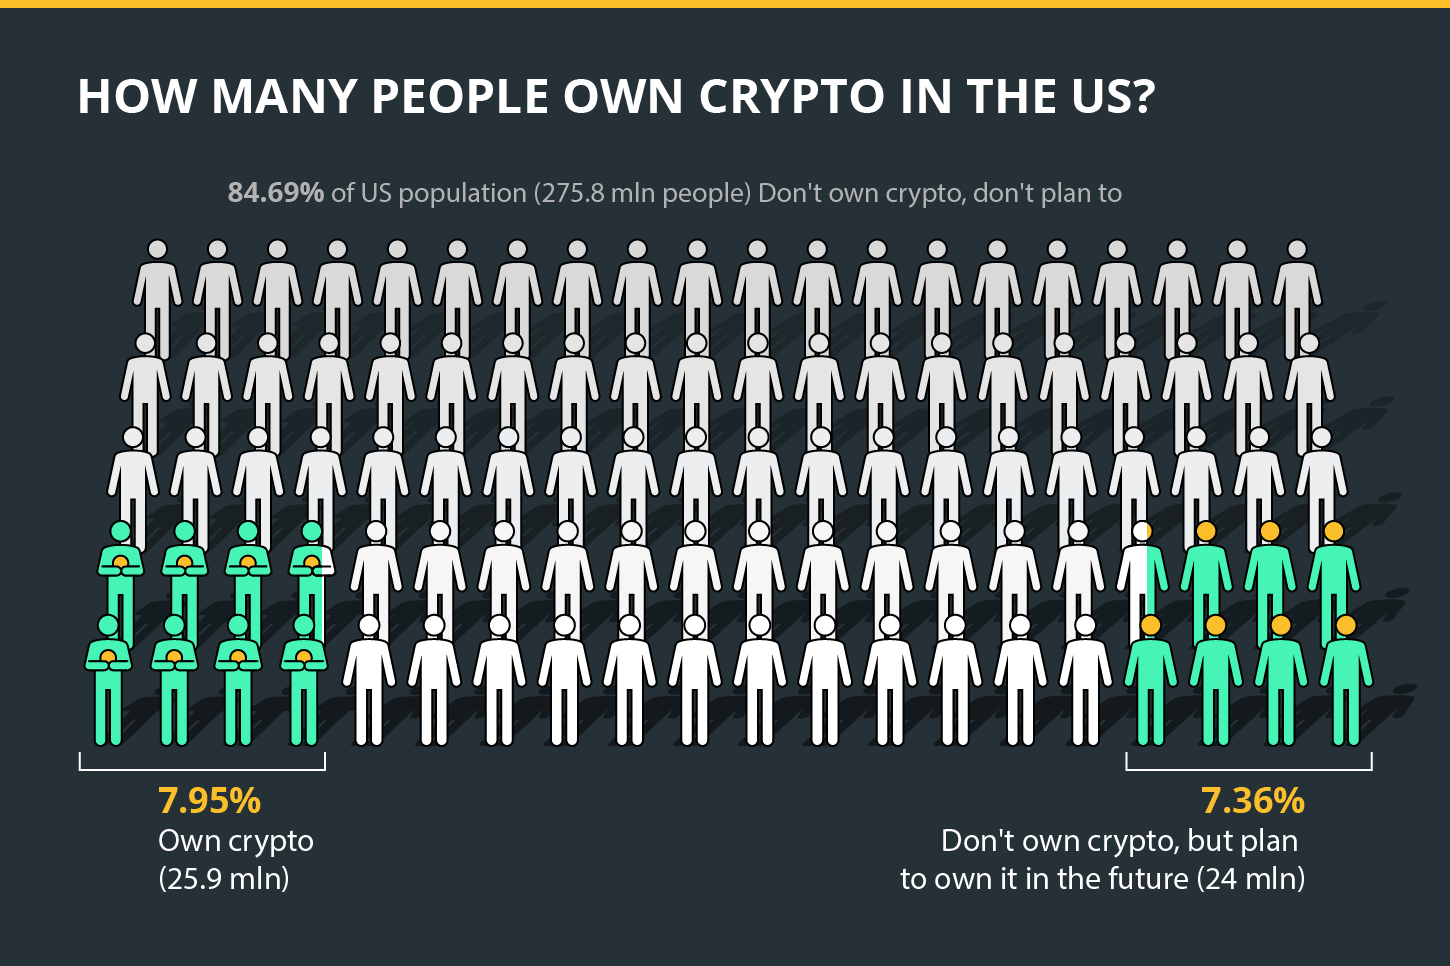 How many people own crypto in the US?